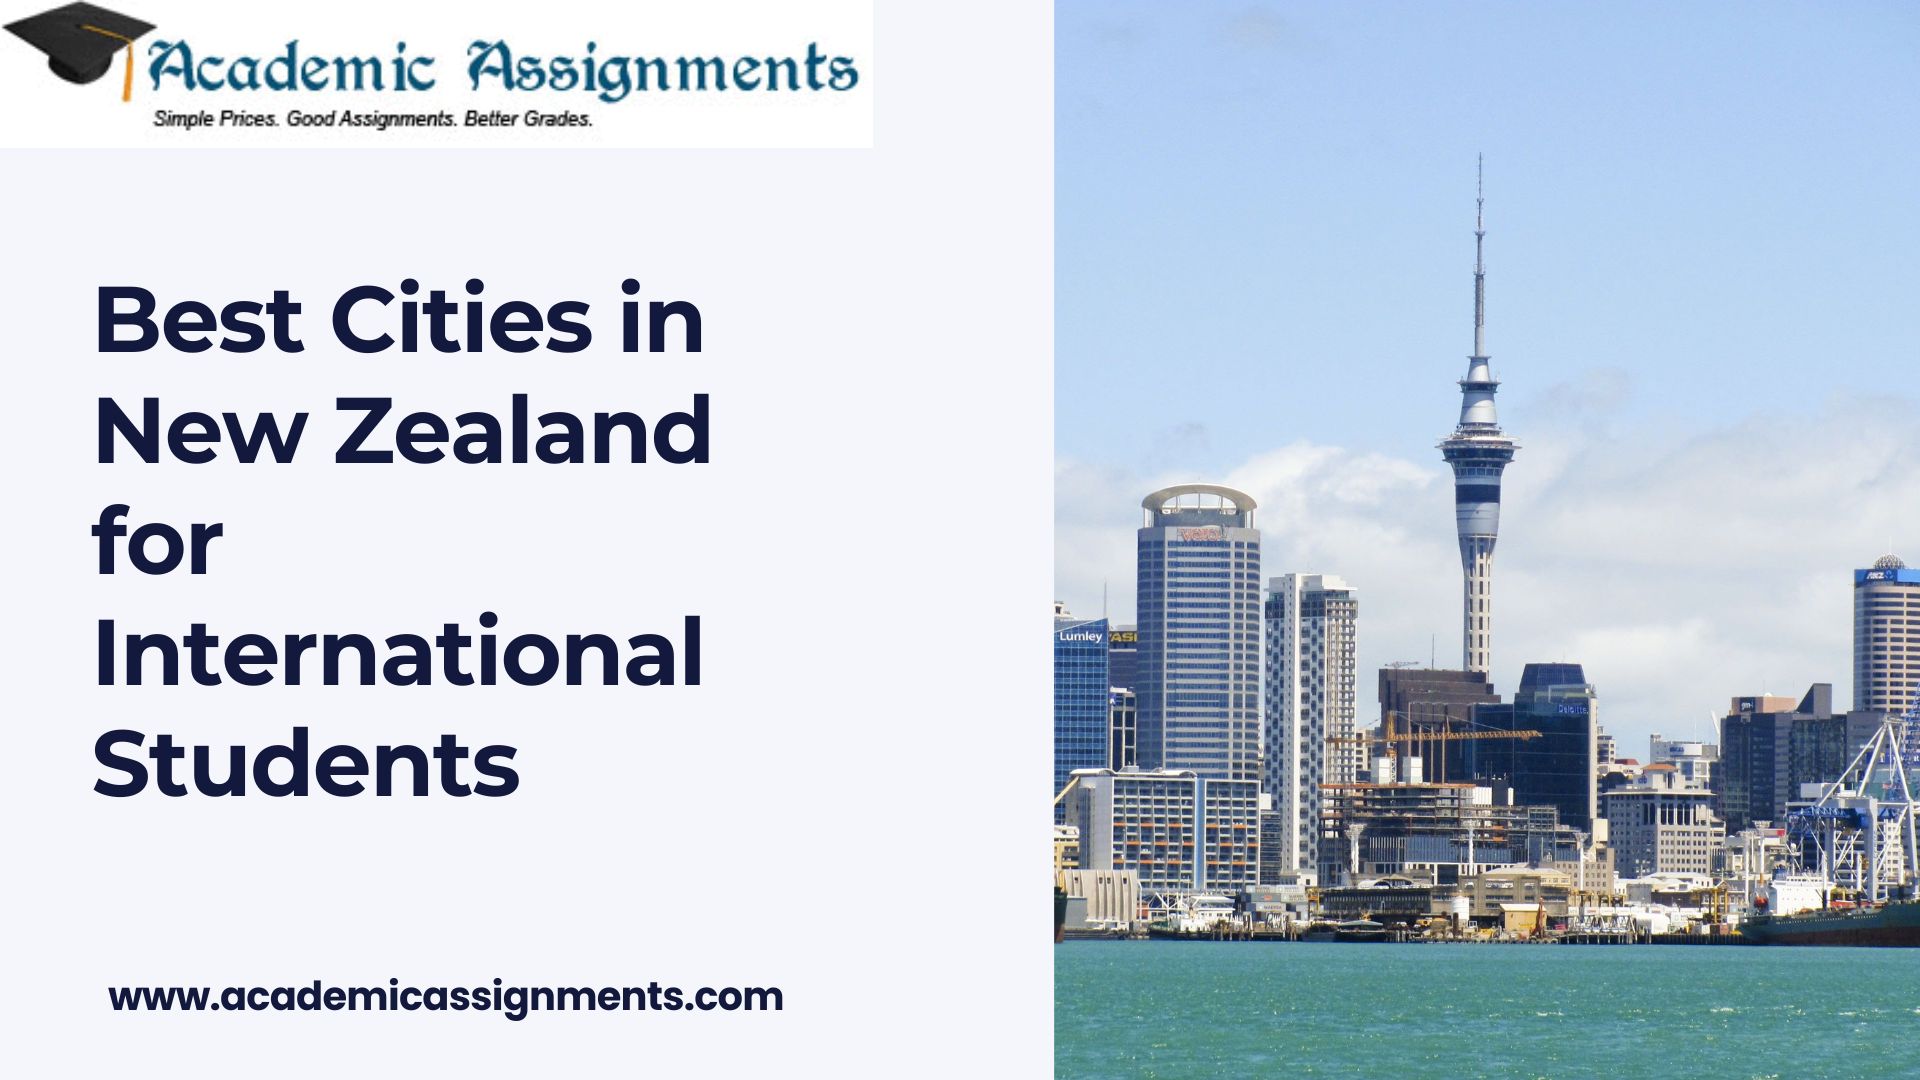 Best Cities in New Zealand for International Students